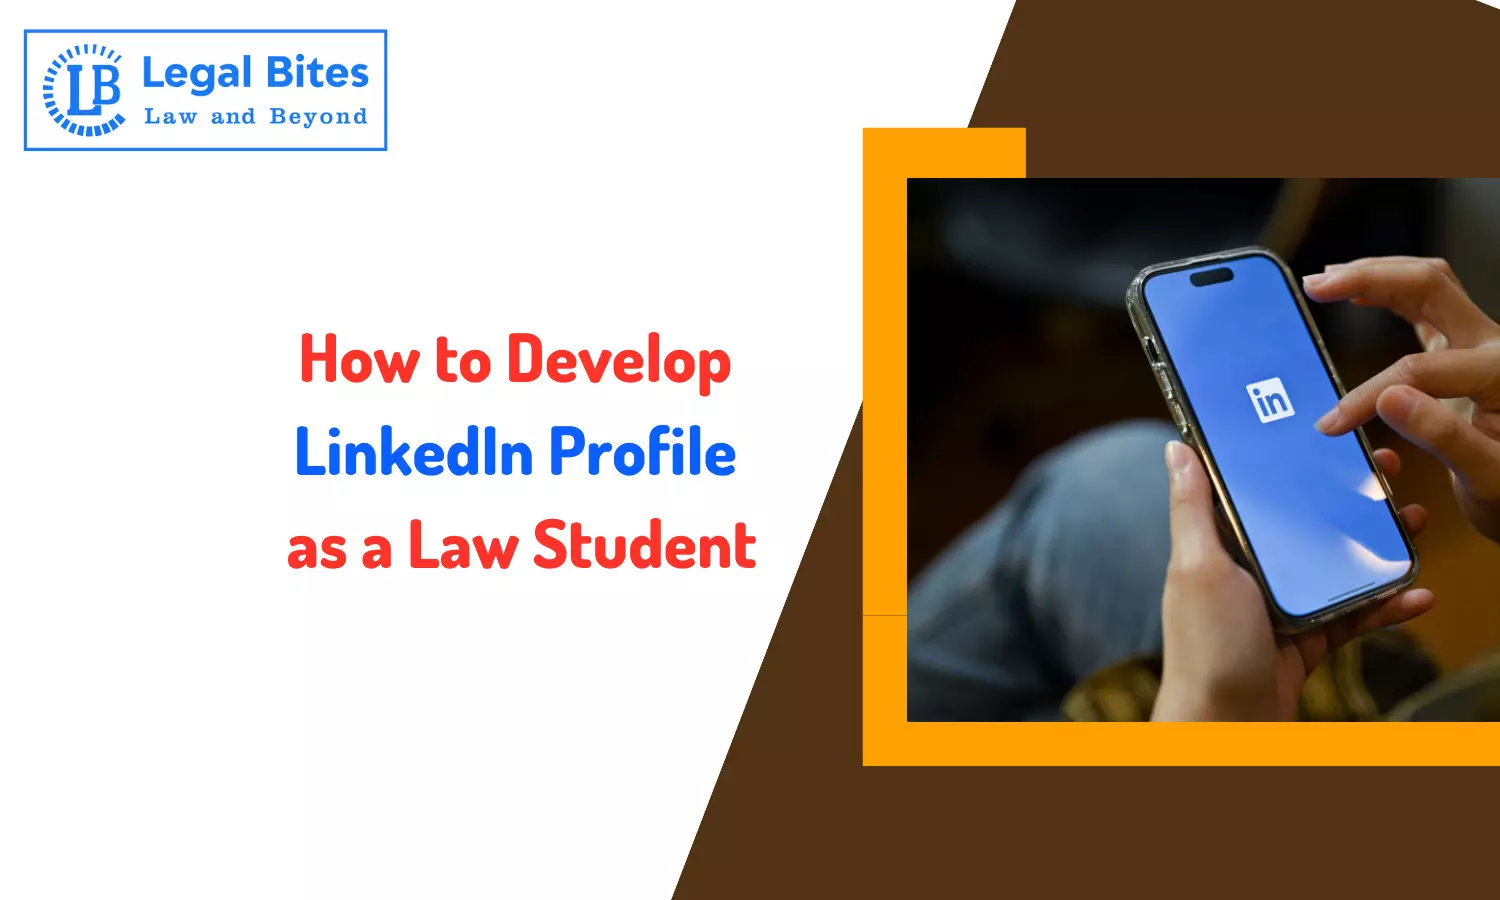 How to Develop LinkedIn Profile as a Law Student